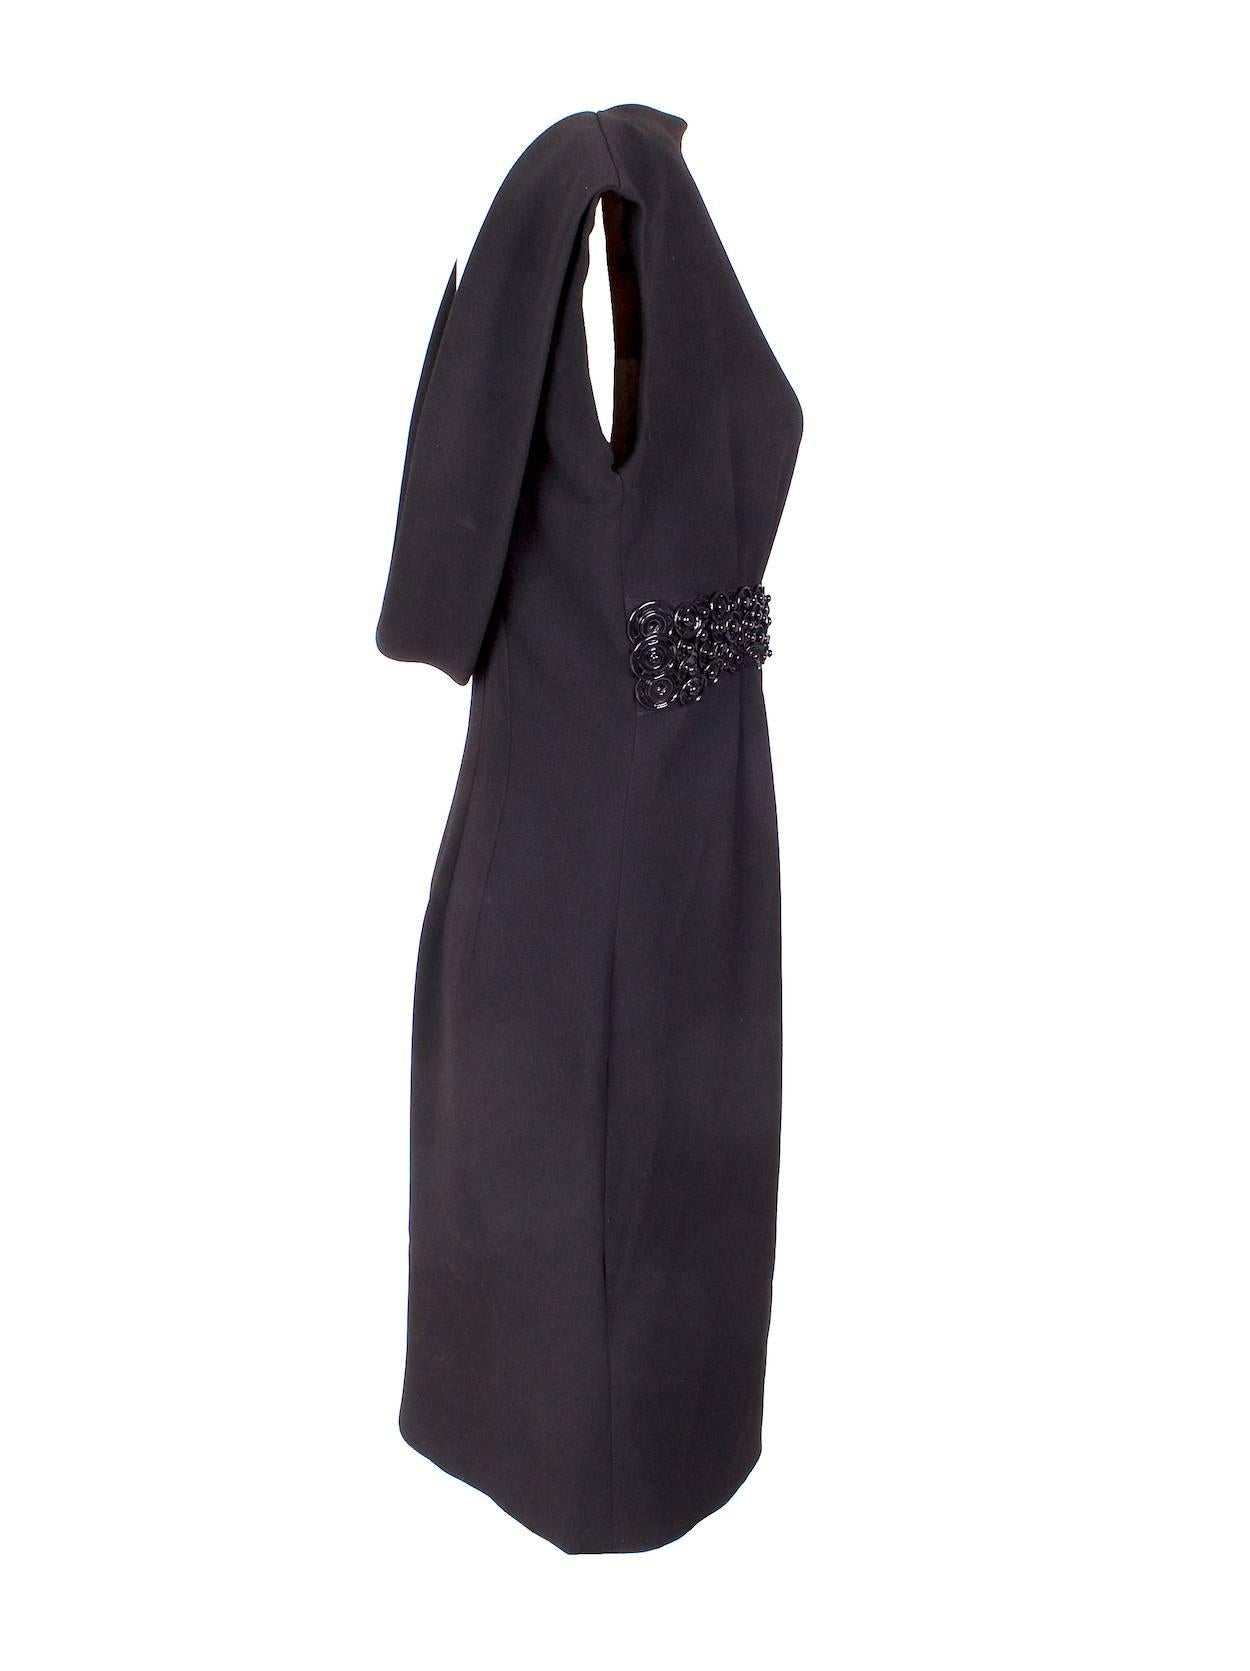 This is a black dress by Jean Paul Gaultier with a cowel drape back and button detailing belt.  